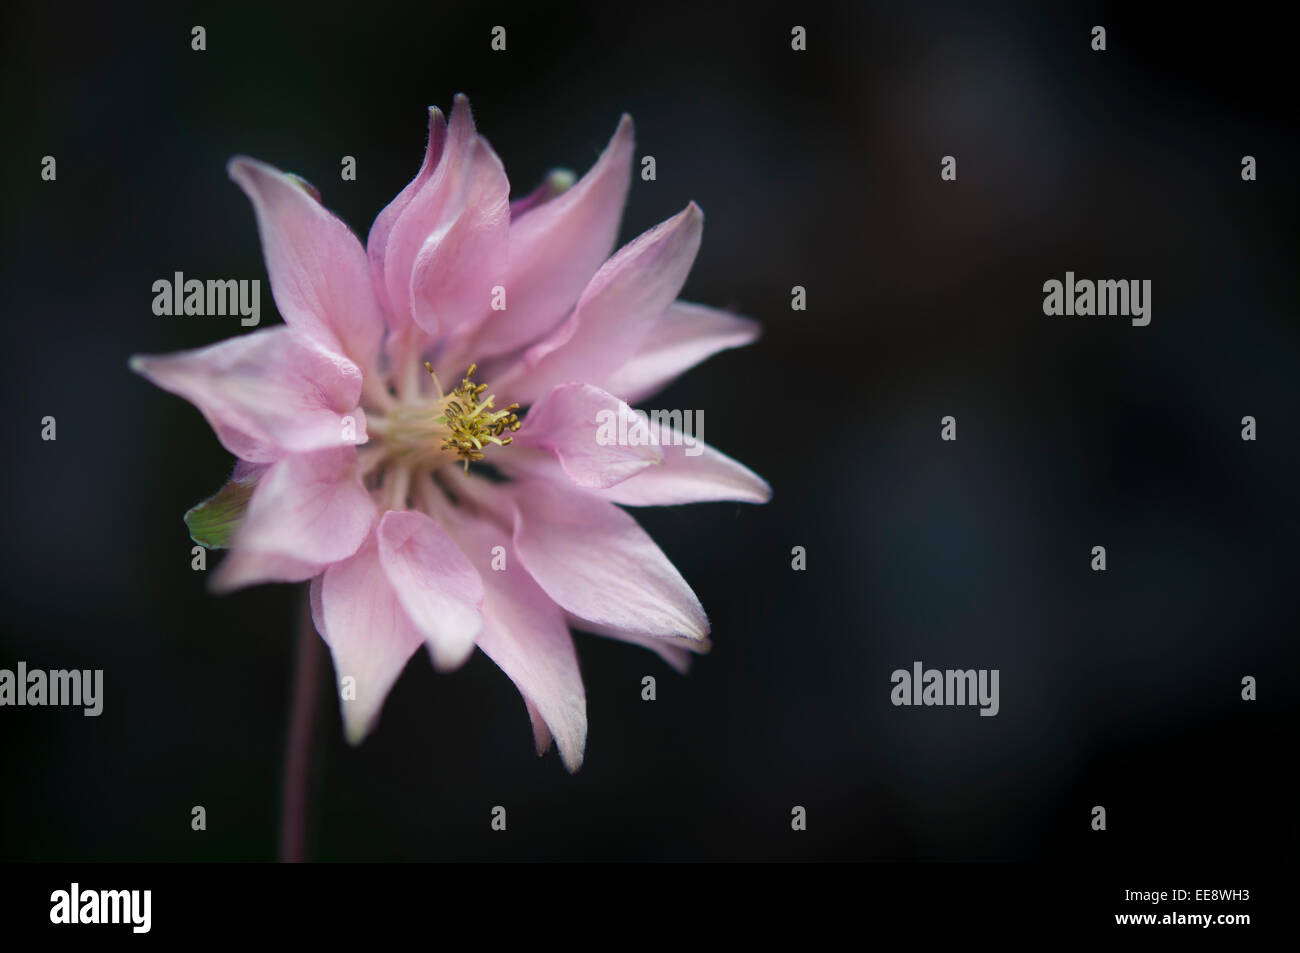 A clematis flowered form of Aquilegia (Granny's Bonnet) with soft pink petals and dark background. Stock Photo